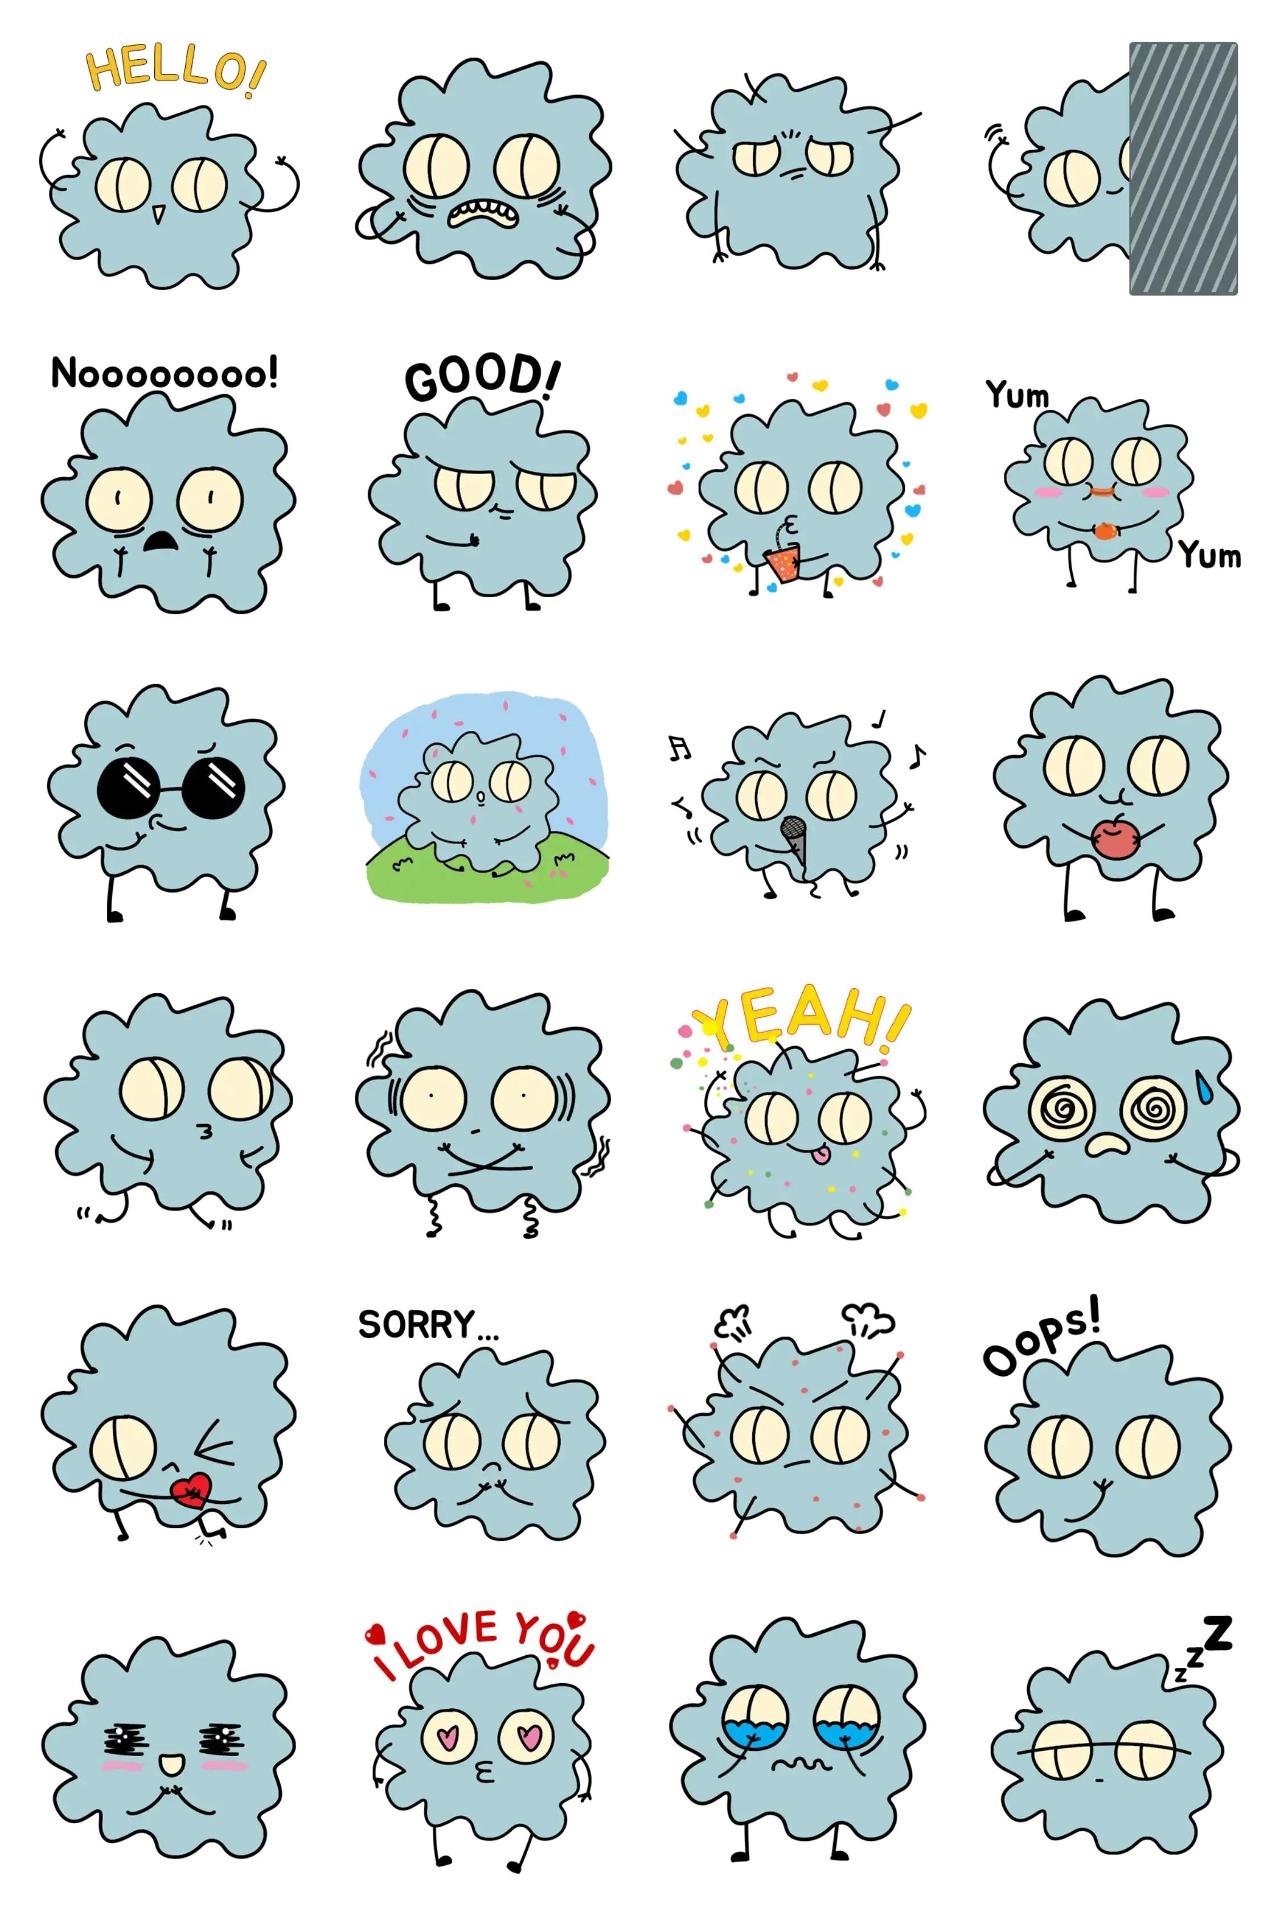 BABY DUST Louie Animation/Cartoon,Etc. sticker pack for Whatsapp, Telegram, Signal, and others chatting and message apps